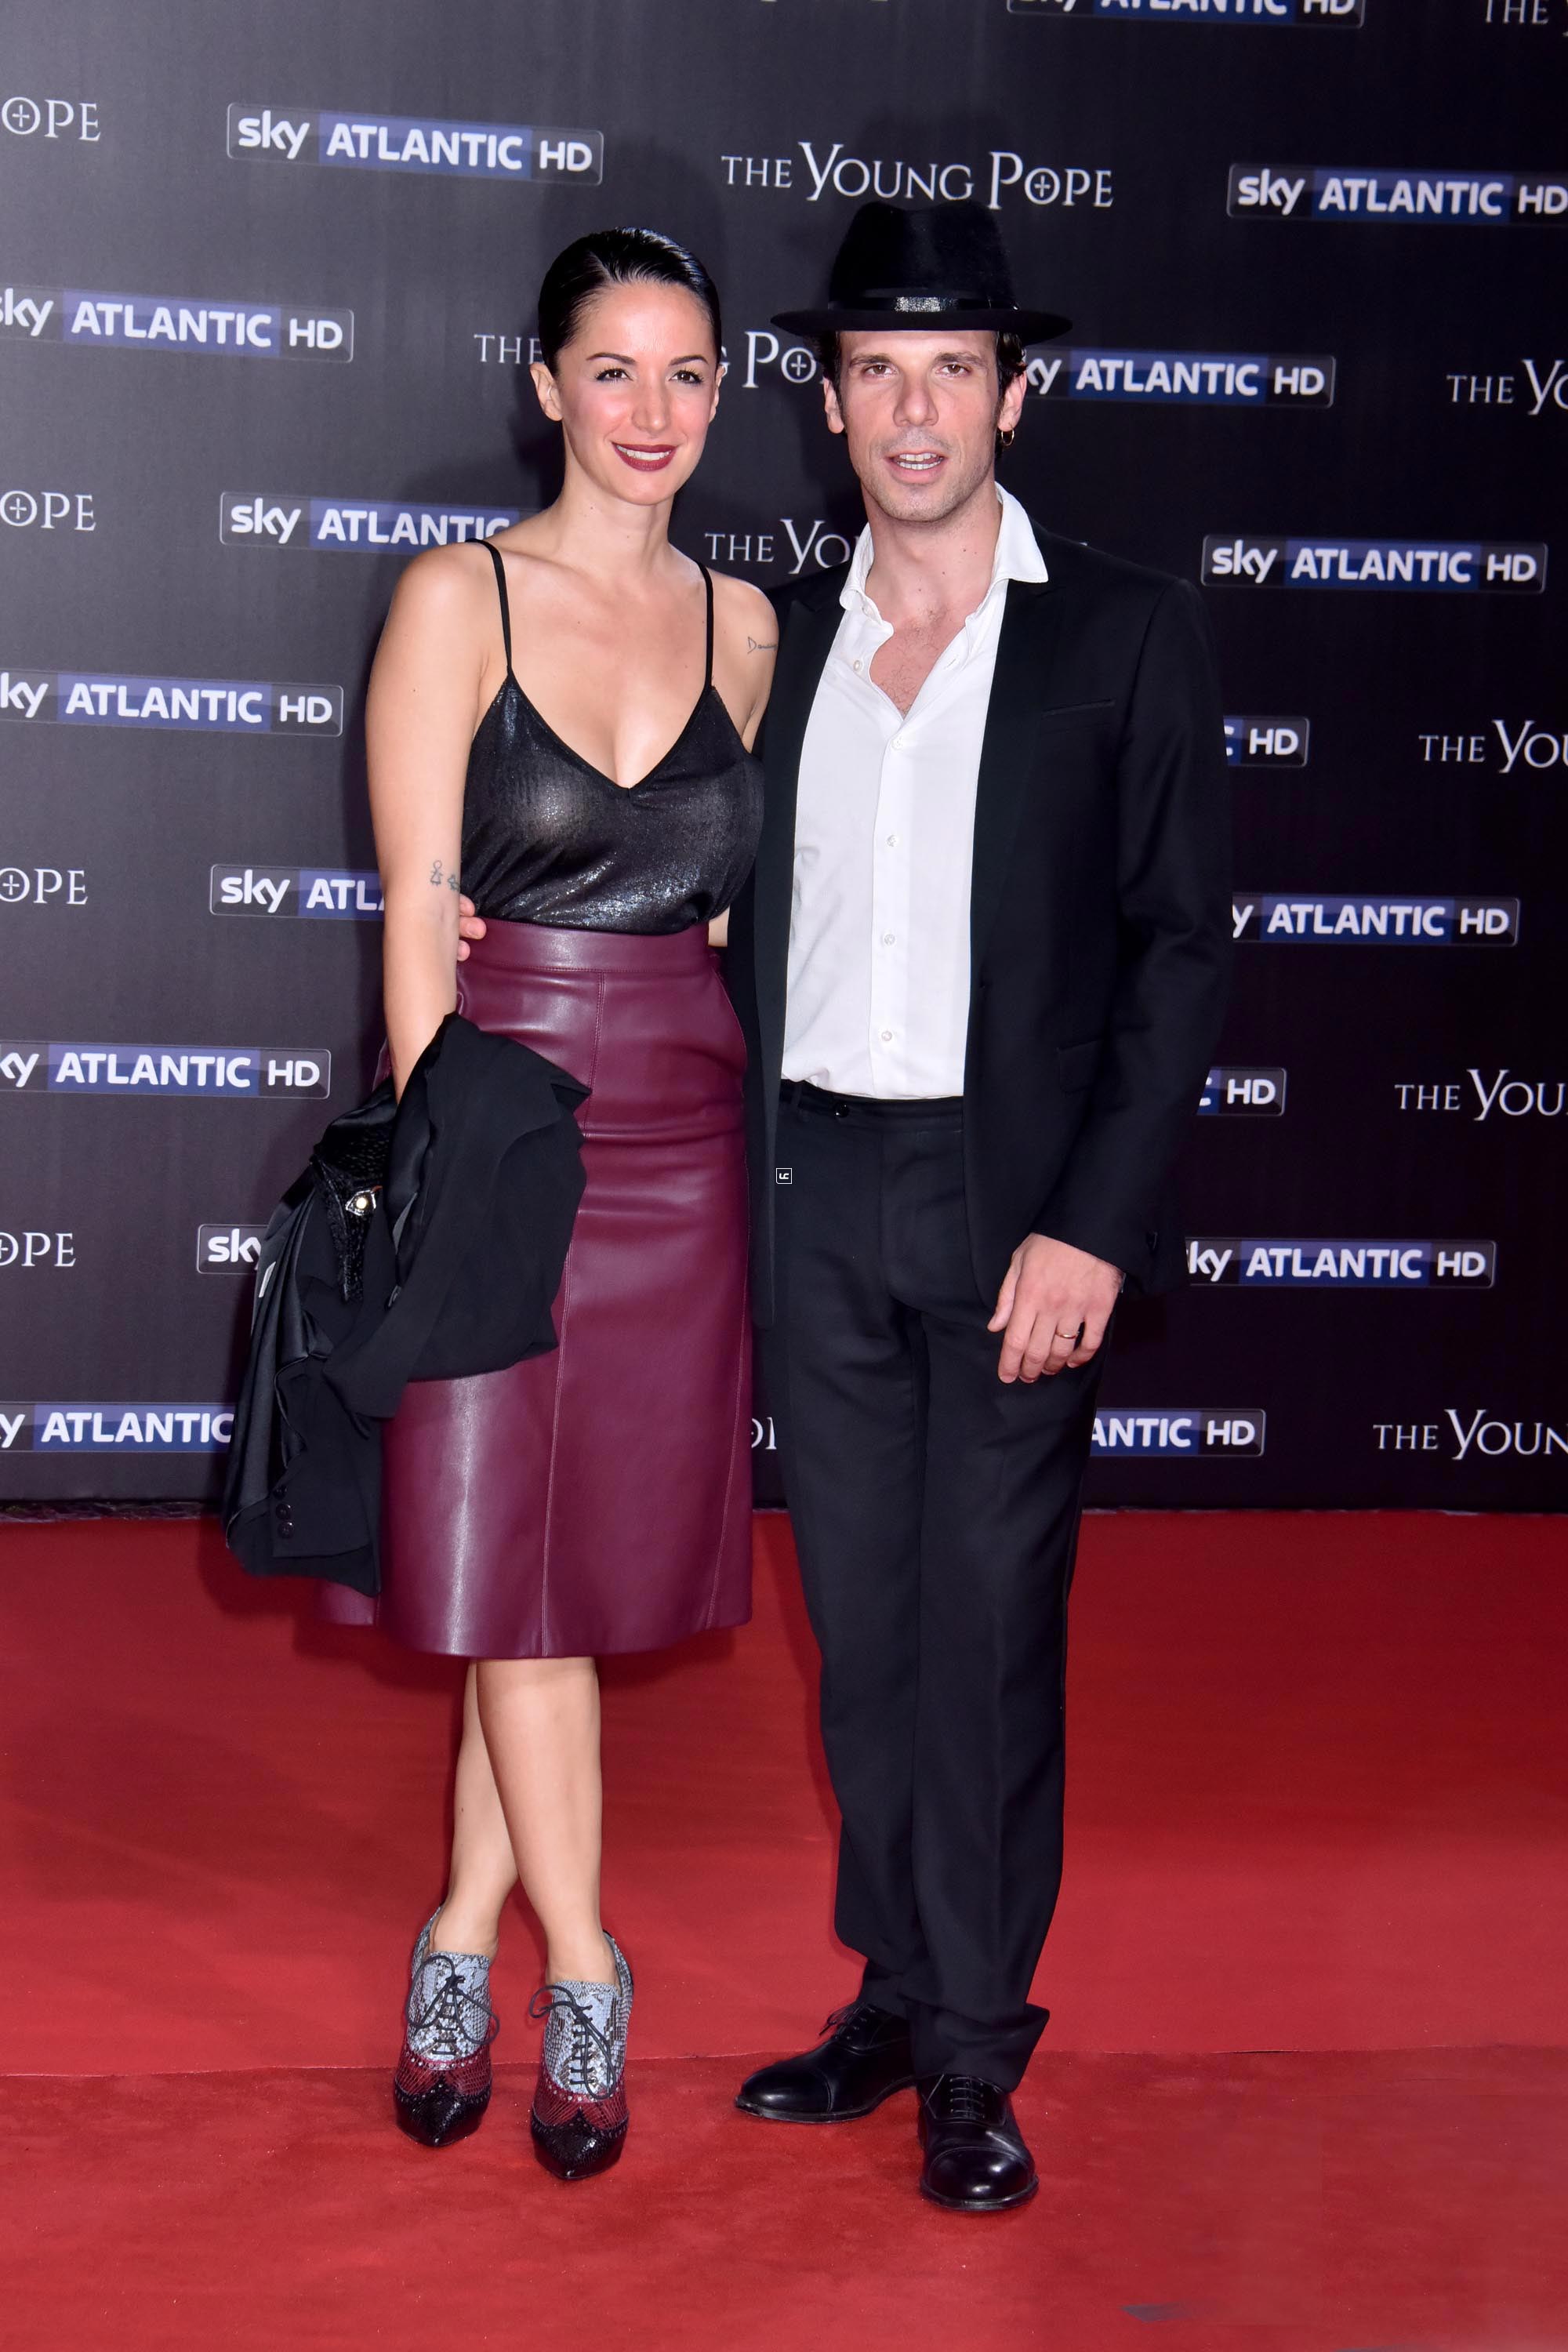 Andrea Delogu walks the red carpet at ‘The Young Pope’ premiere